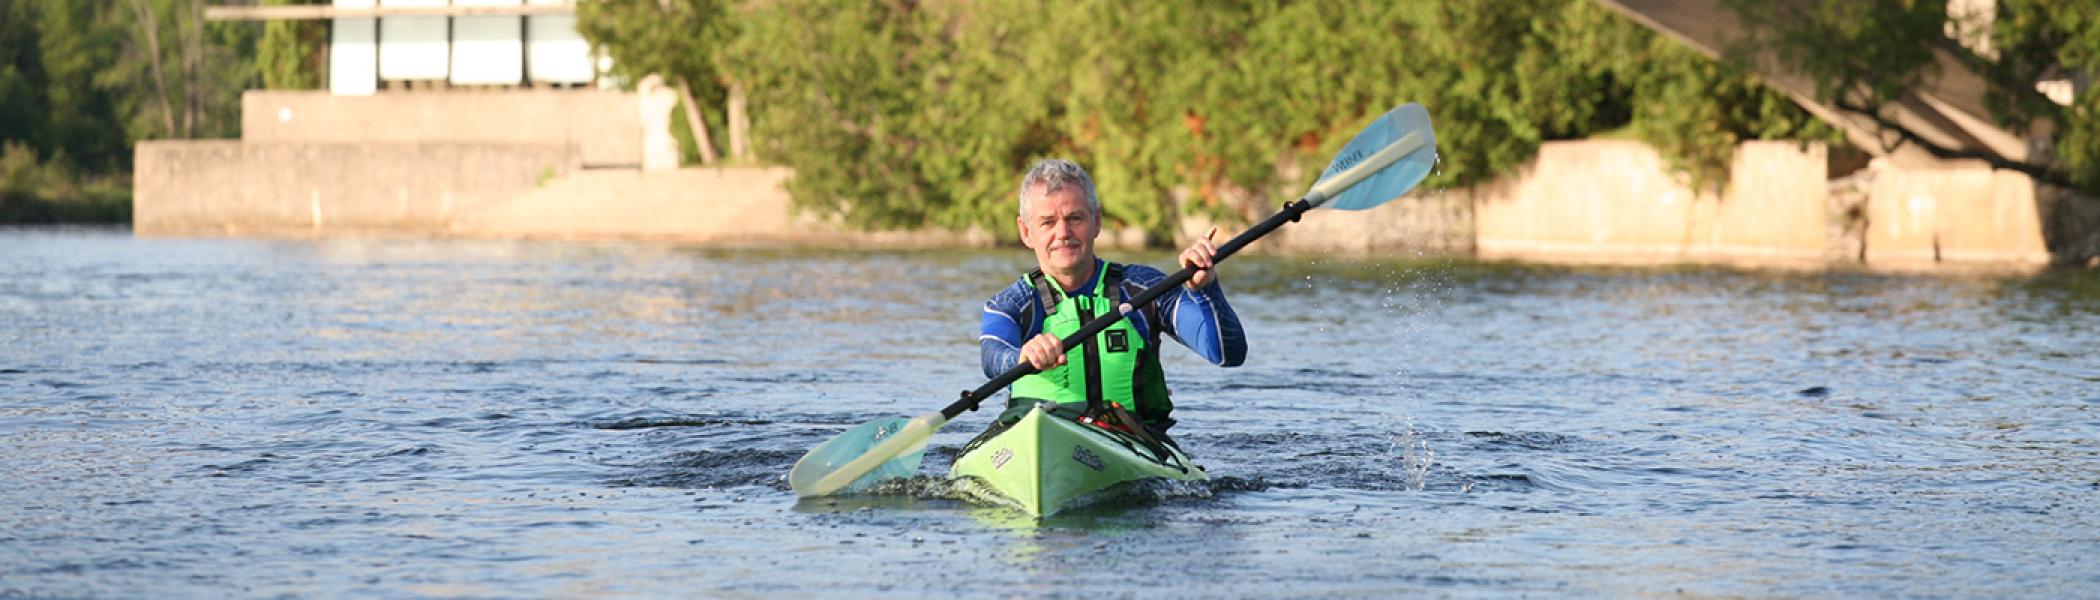 Dr. Leo Groarke kayaking on the Otonabee river in front of the Bata Library